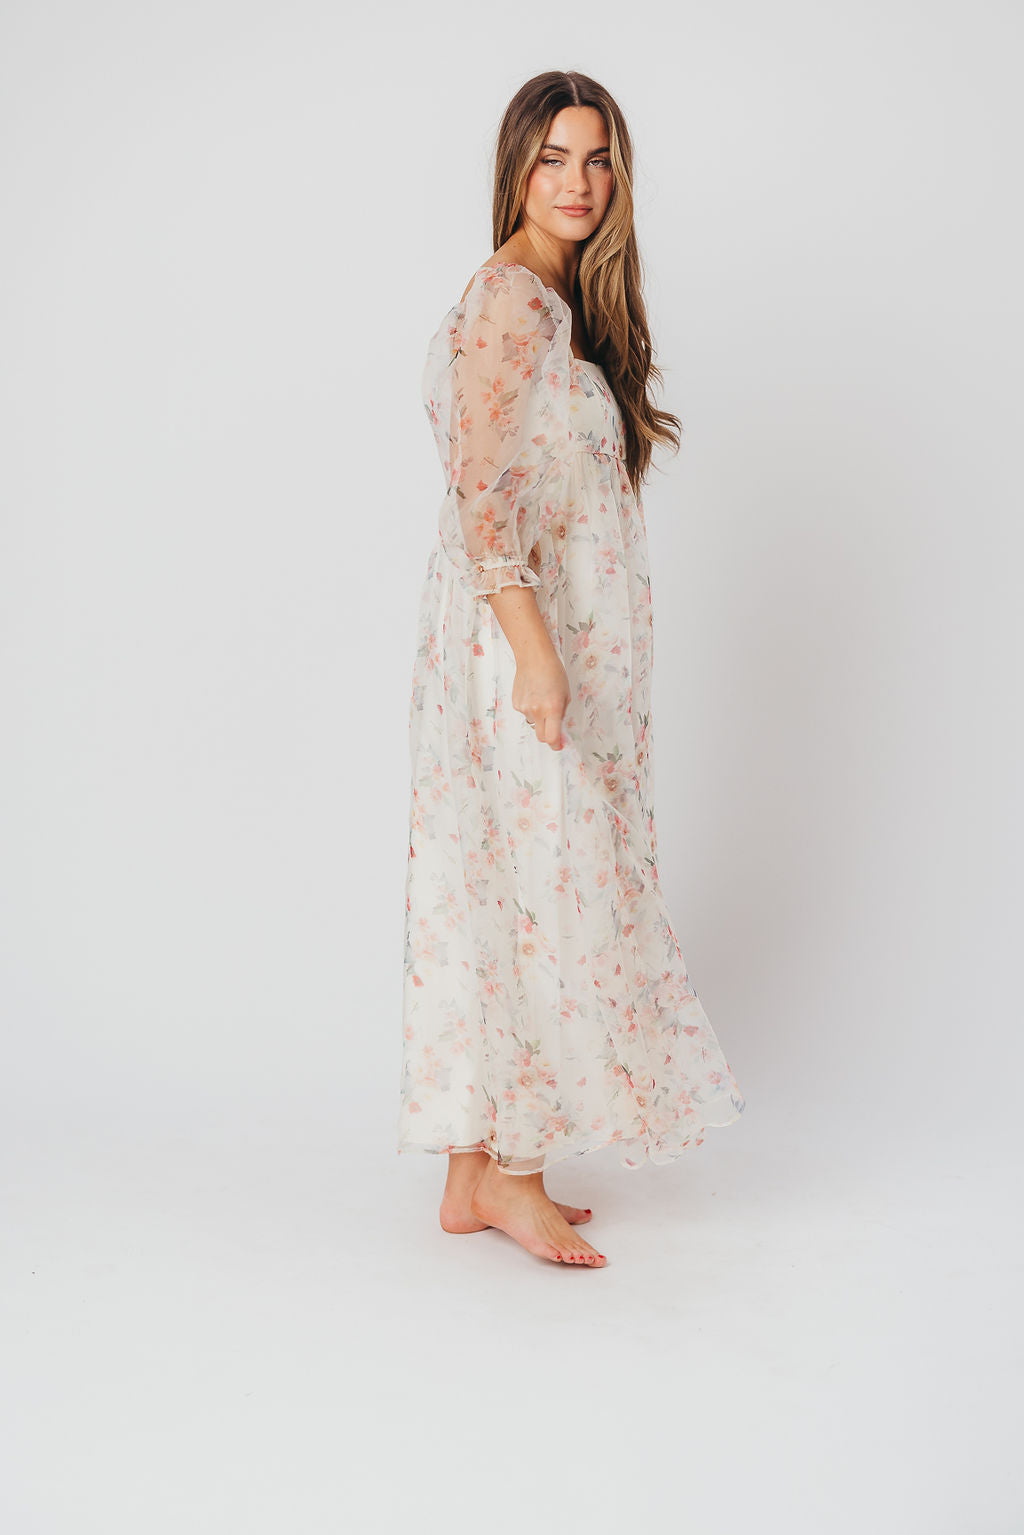 *New* Mona Maxi Dress with Smocking in Rosebud Floral - Bump Friendly & Inclusive Sizing (S-3XL)